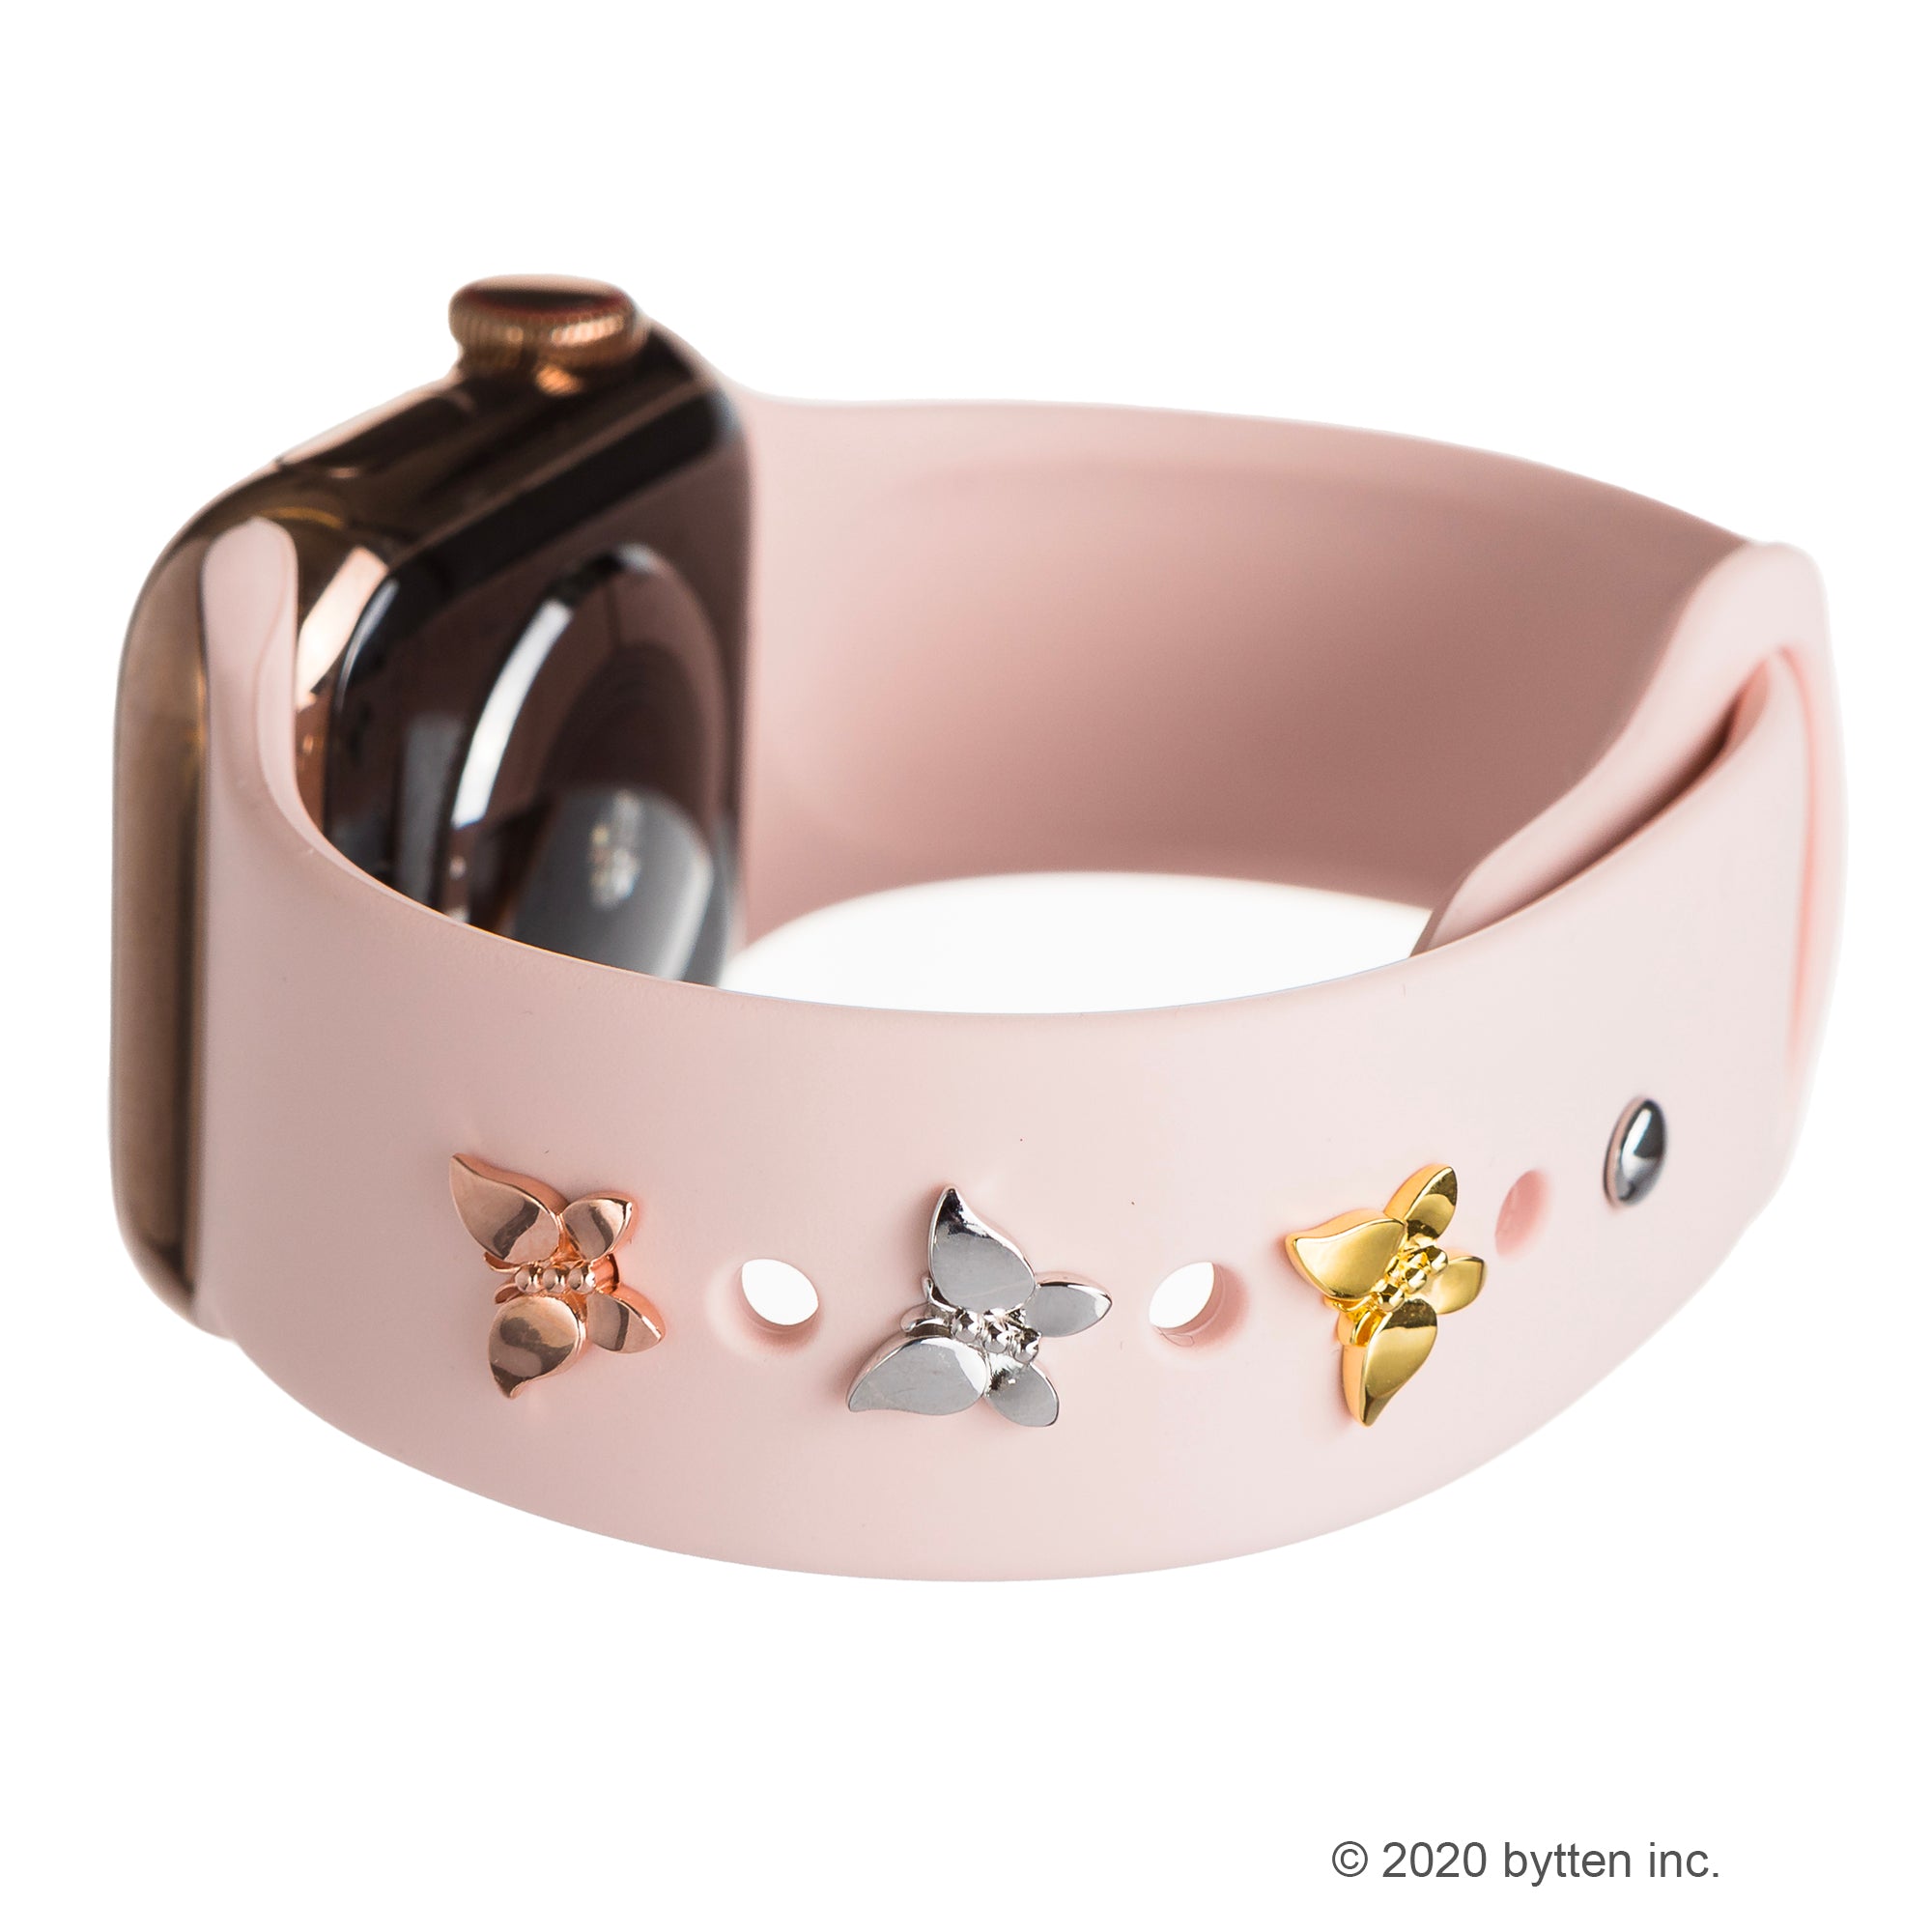 bytten apple watch butterfly iwatch charms in rose gold, silver and gold